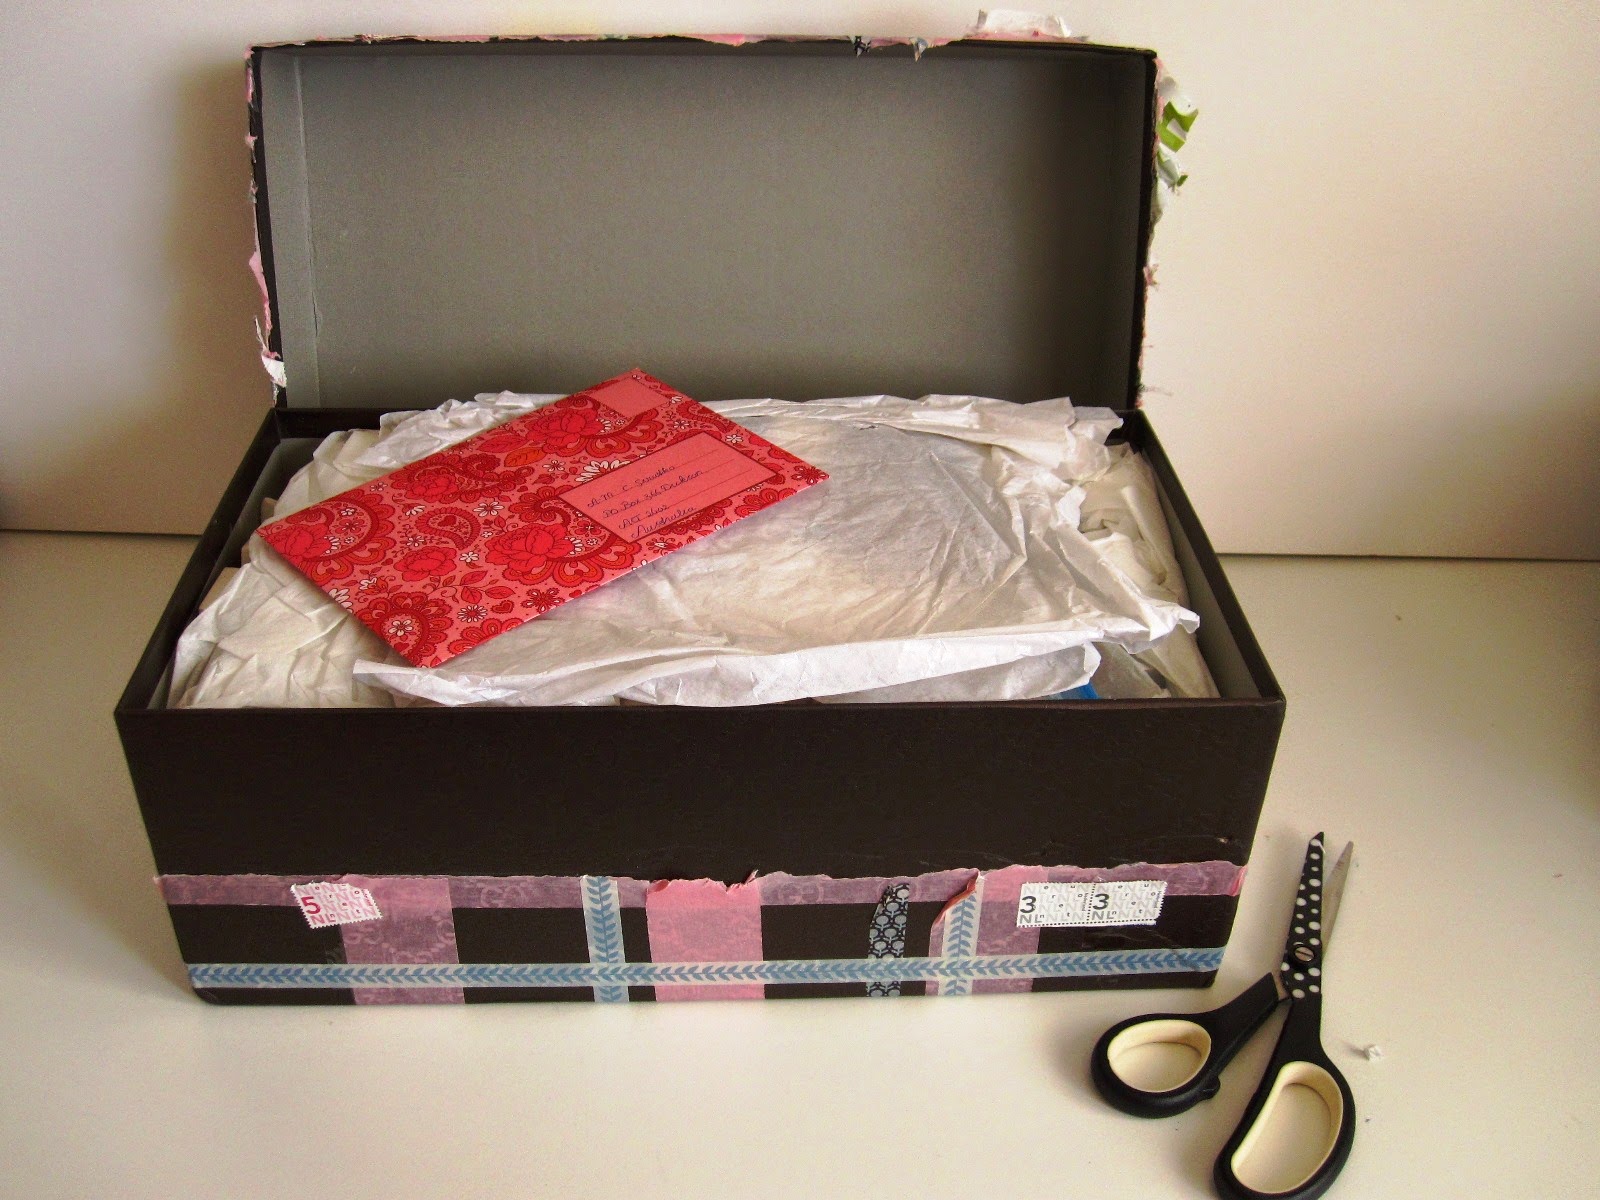 Large washi tape-wrapped shoebox with lid off, showing tissue paper and a colourful envelope on top of it.